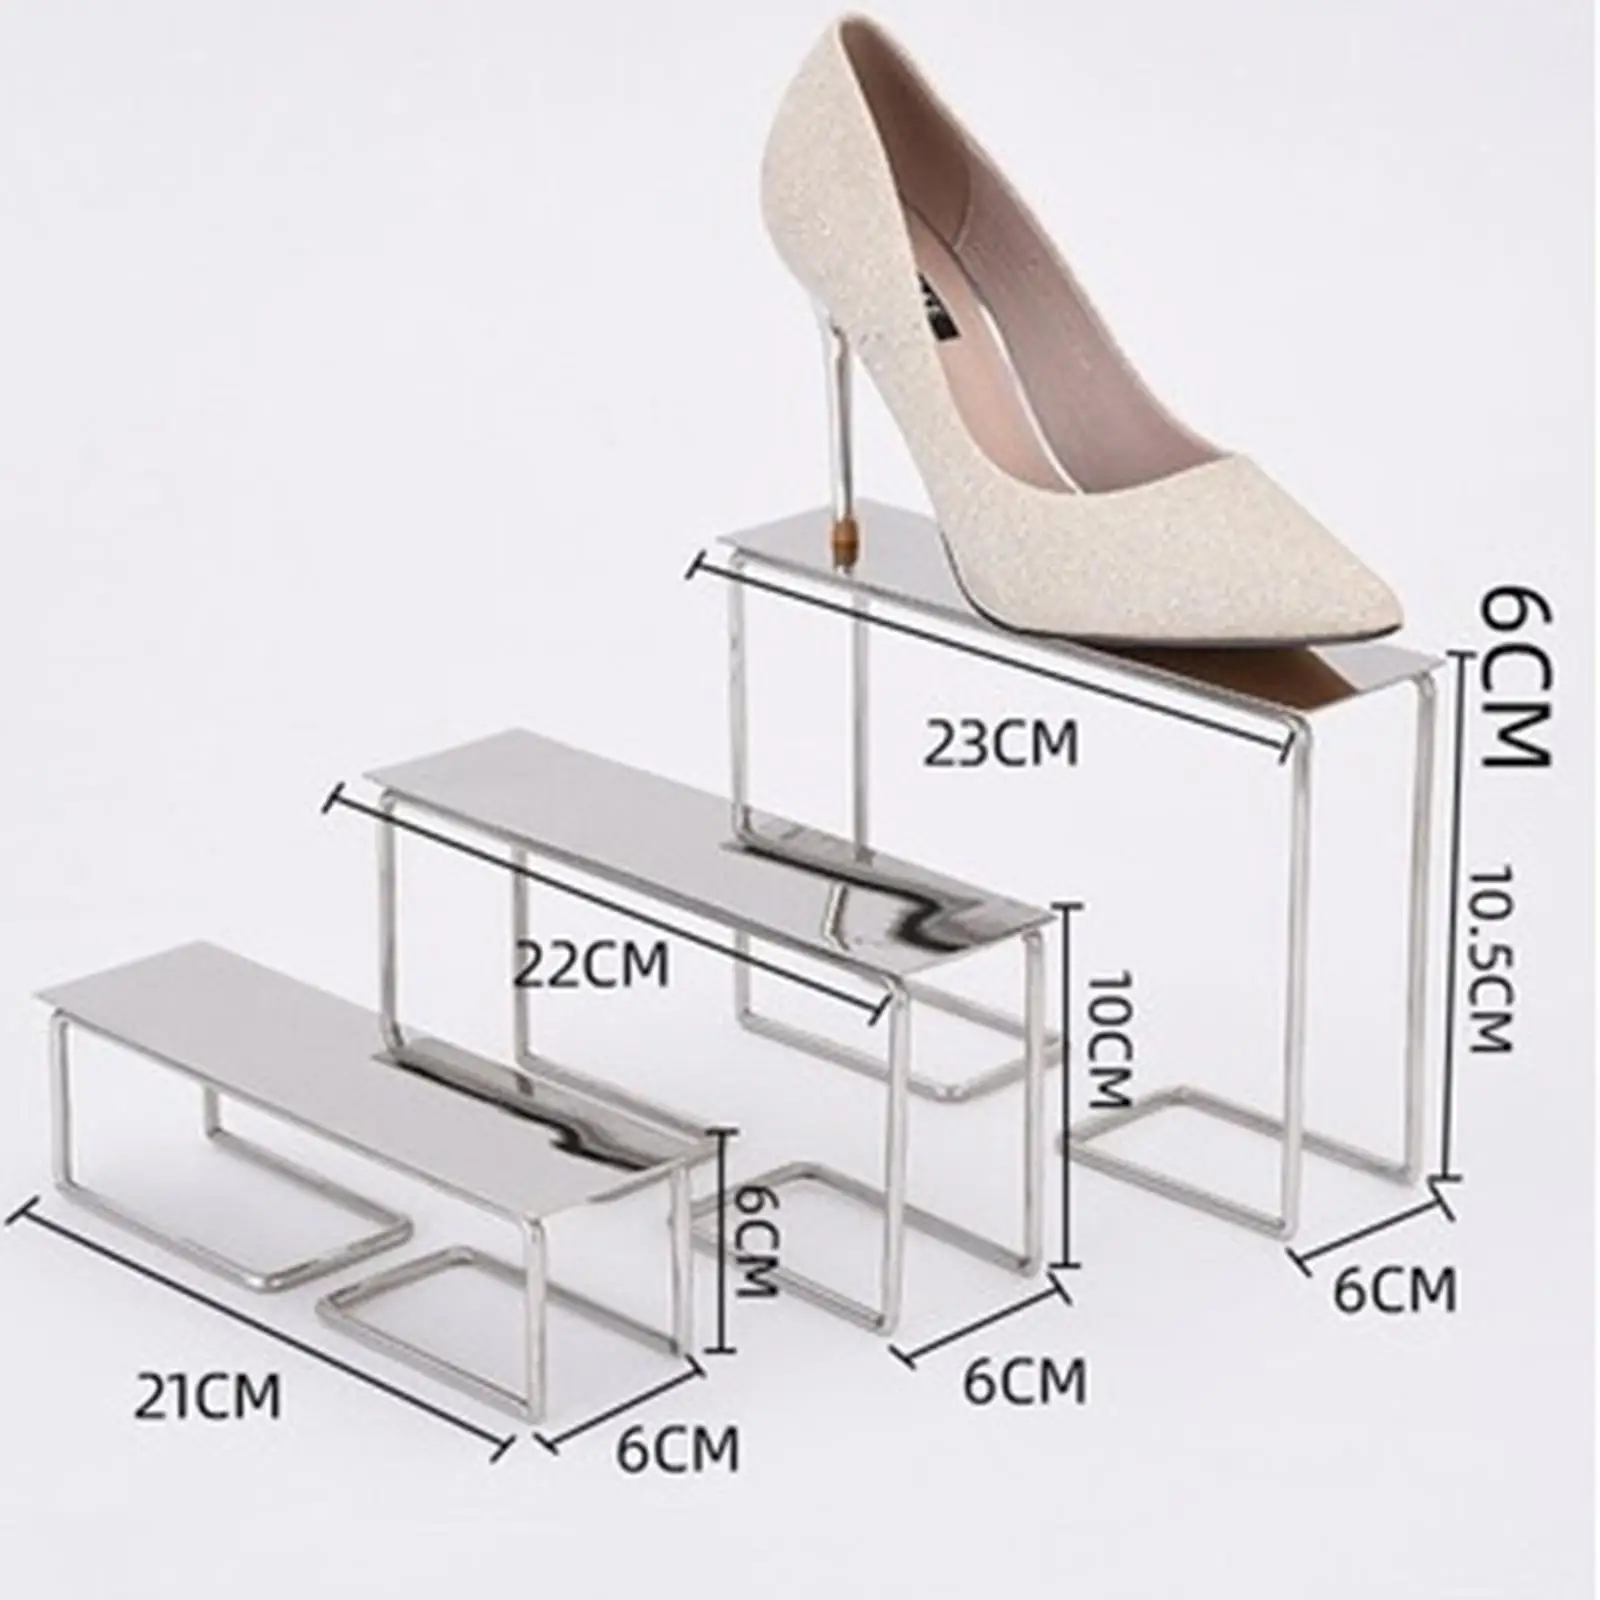 shoes display Stand Shelf Metal Storage Prop Shoes Display Stand Holder for Sandals Sports Shoe Countertop Window Display Stands